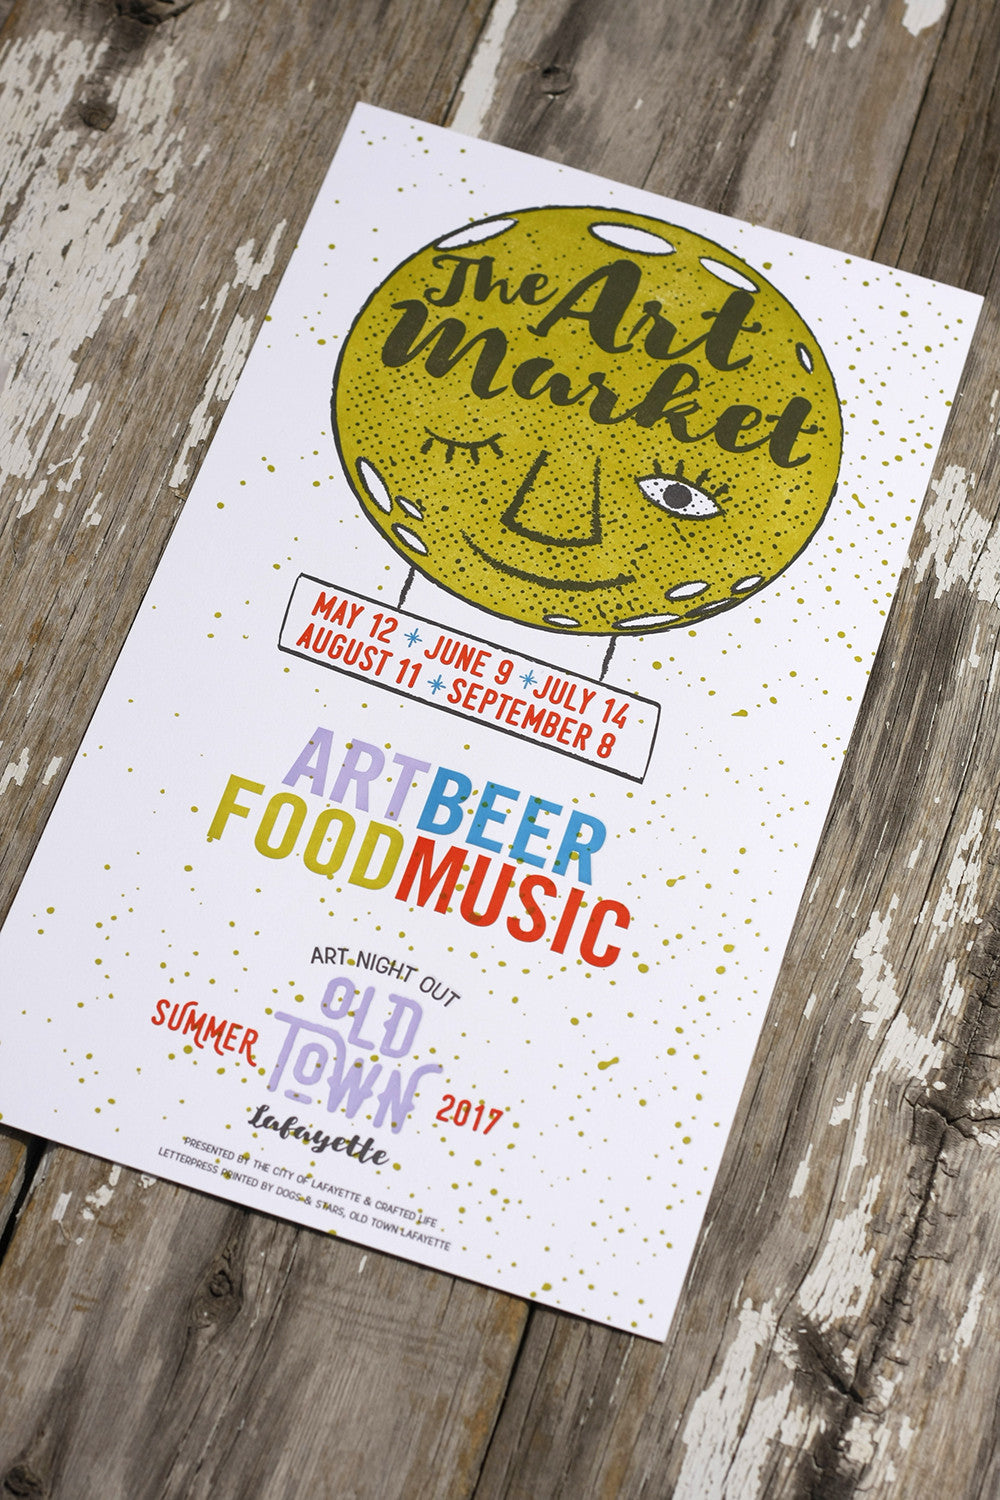 Art Night Out Letterpress Poster Custom Printing Old Town Lafayette